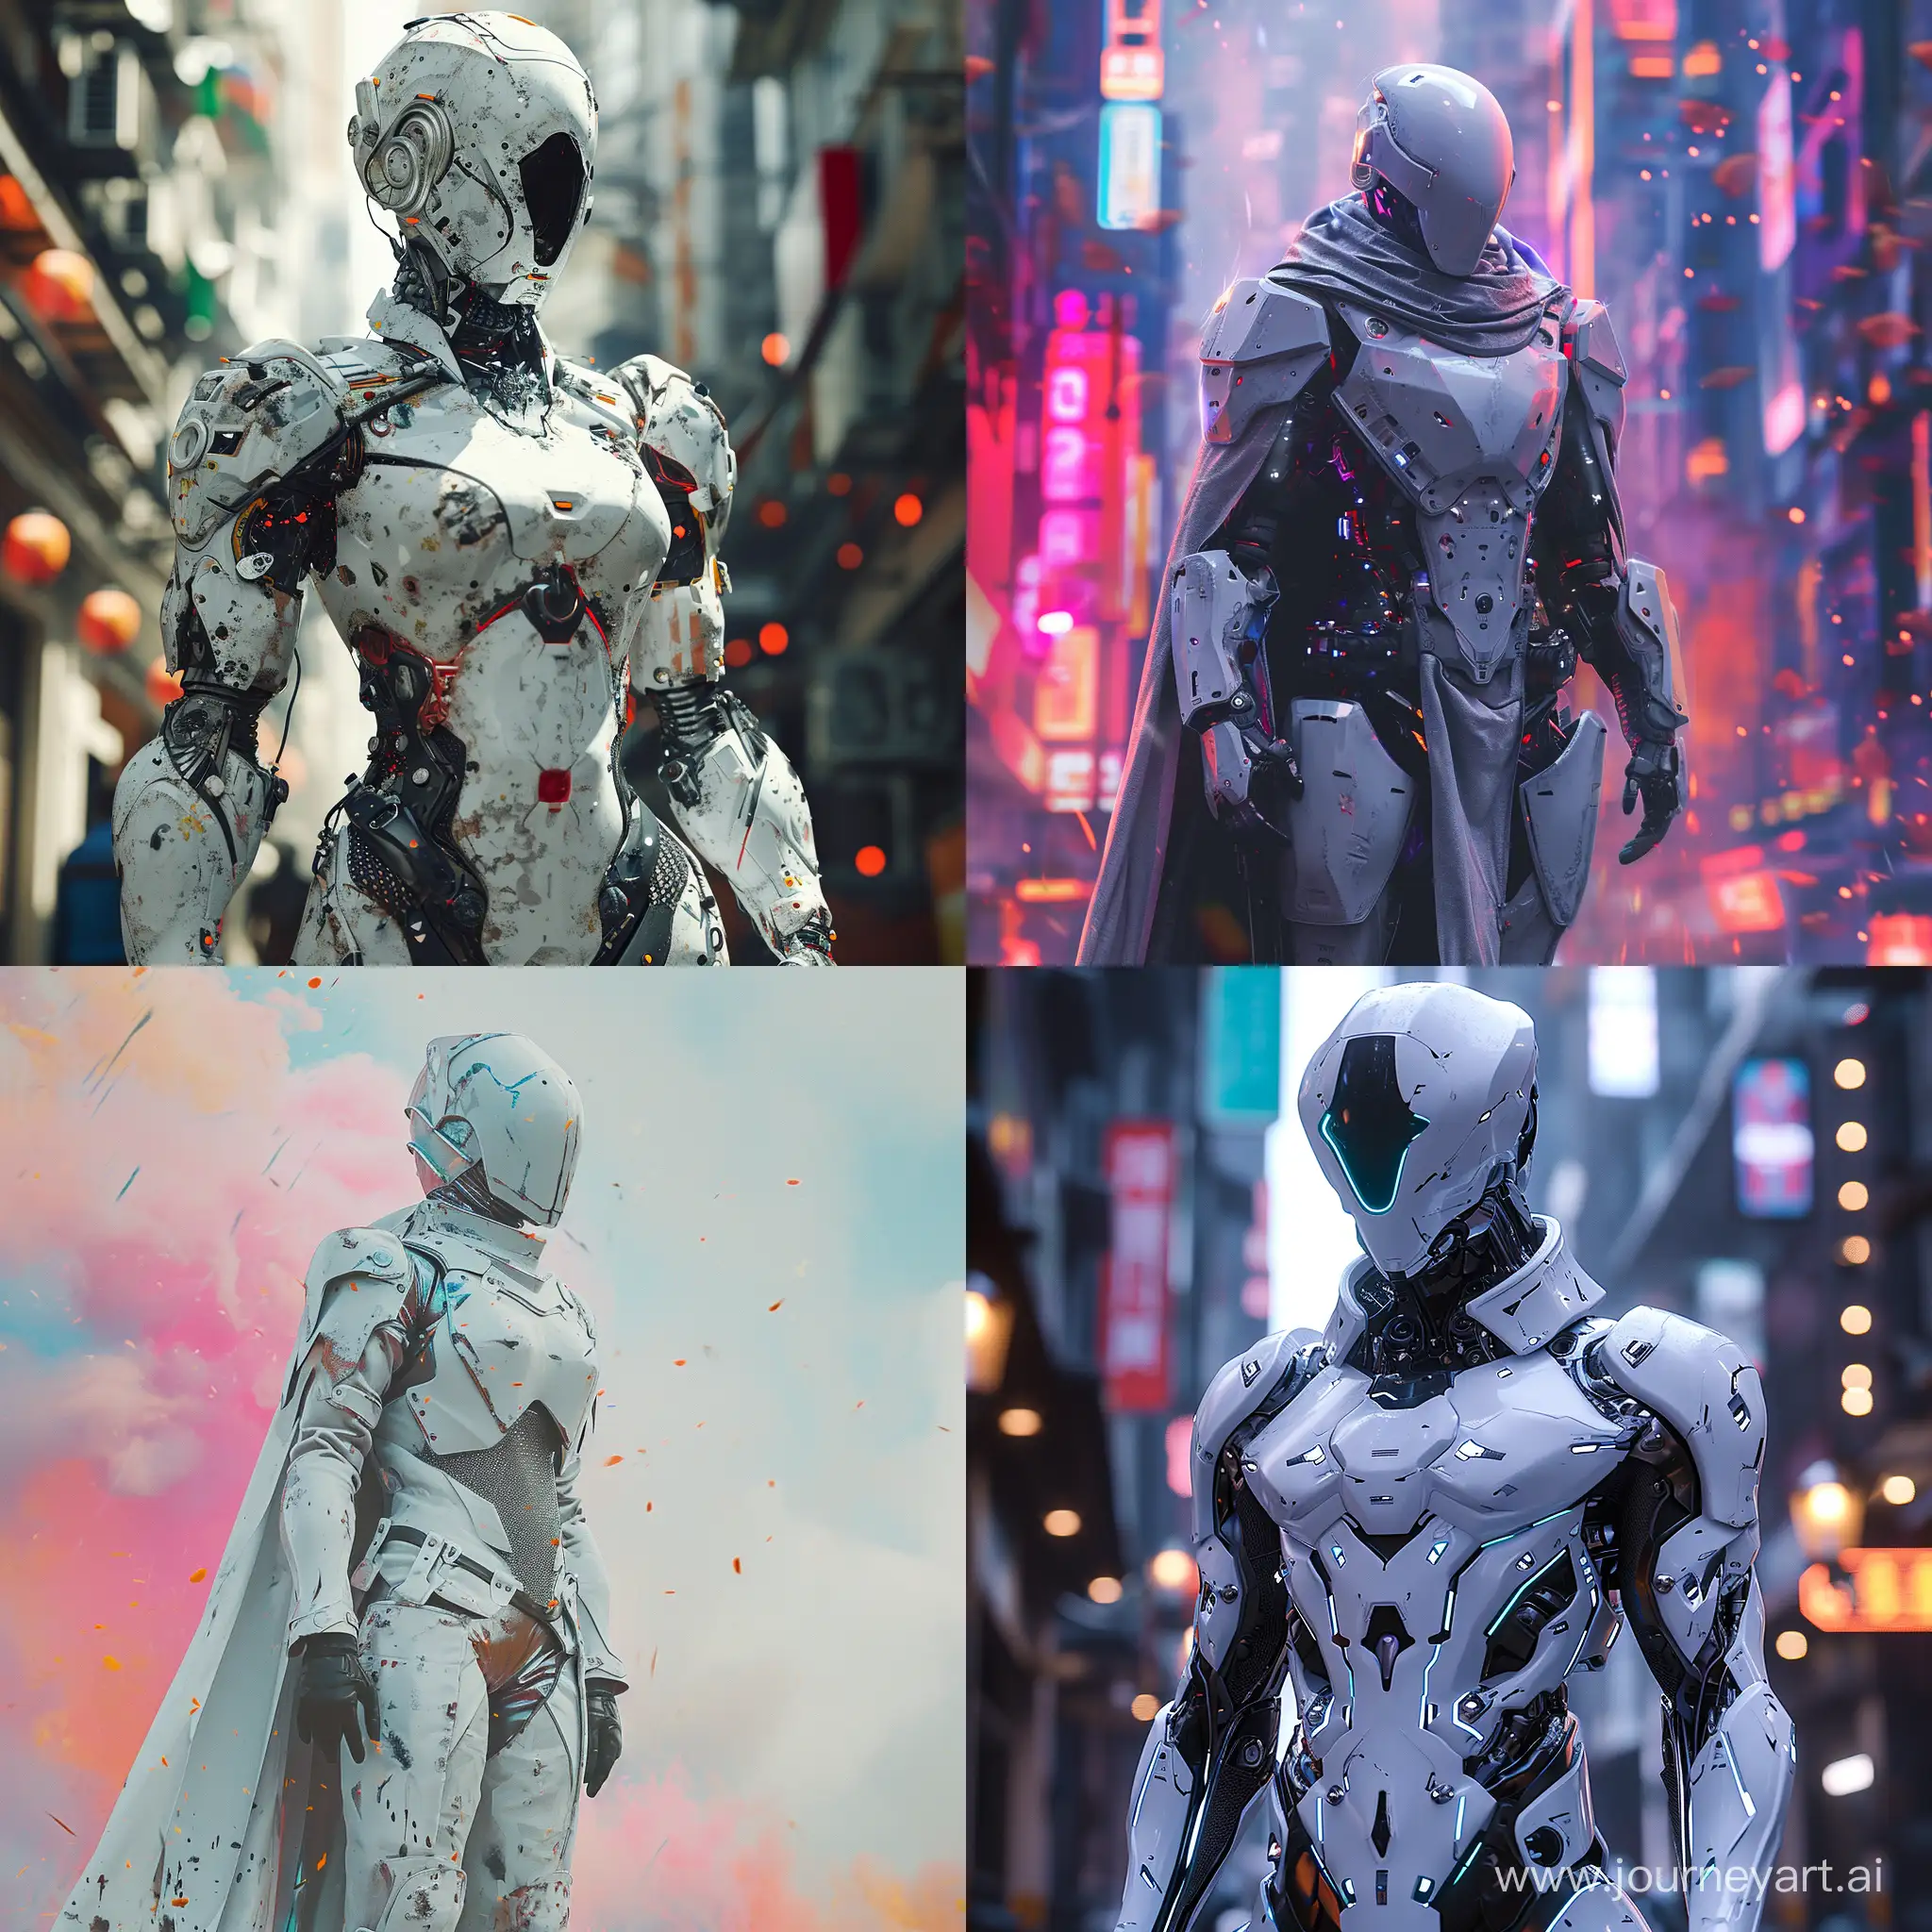 8K, V-Ray, realism, Full length portrait, a cybernetic white knight stands tall in unusual armor. in cyberpunk style, ::1.1. on the background explosion of colors